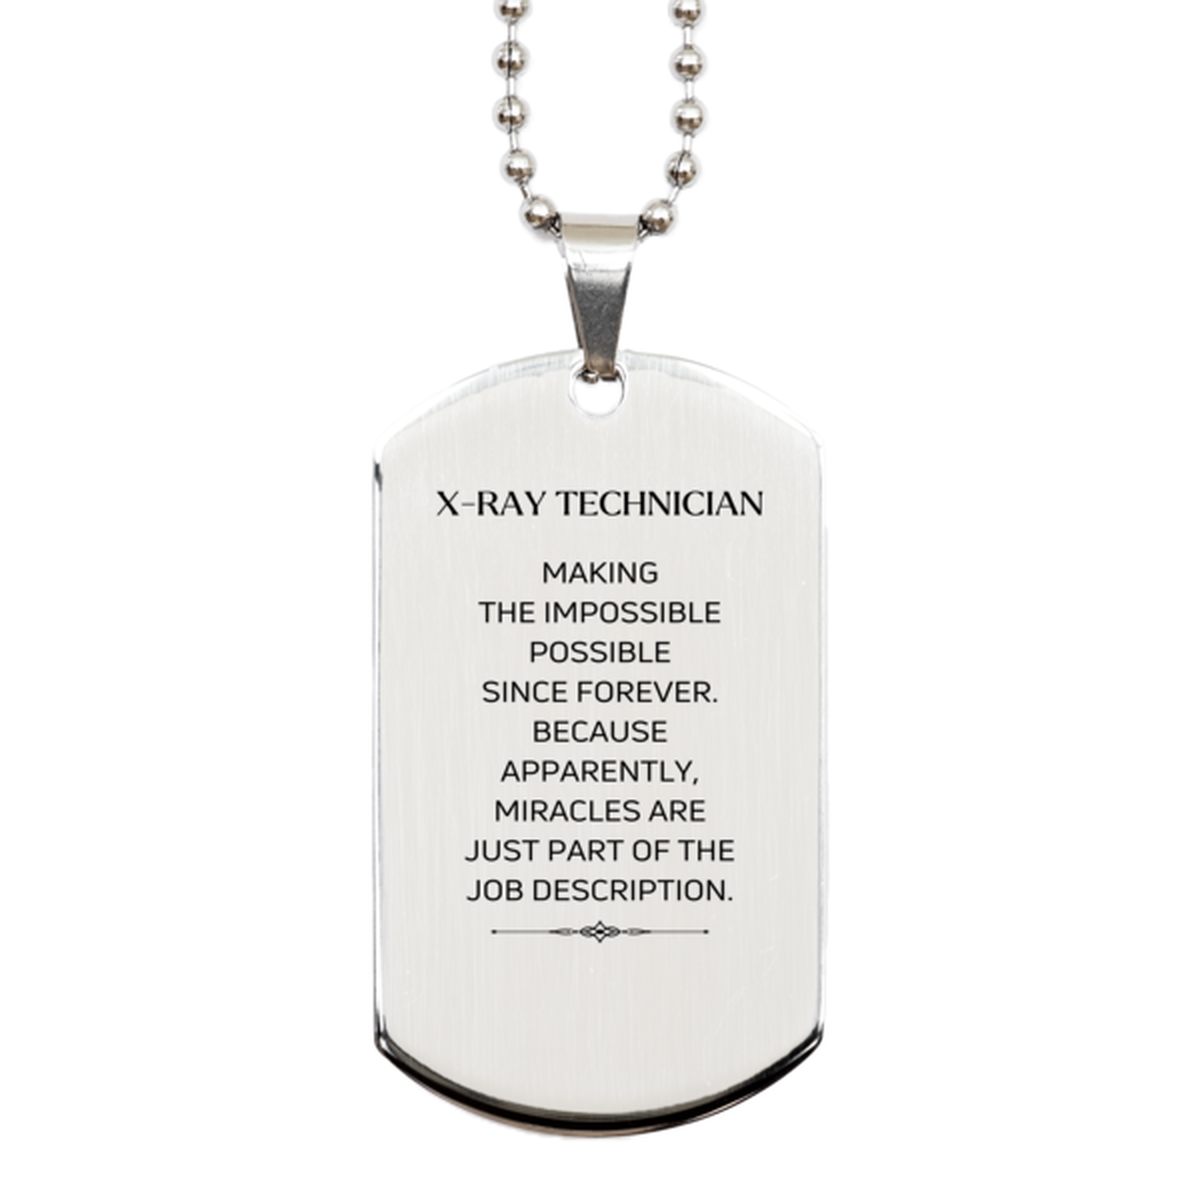 Funny X-Ray Technician Gifts, Miracles are just part of the job description, Inspirational Birthday Silver Dog Tag For X-Ray Technician, Men, Women, Coworkers, Friends, Boss